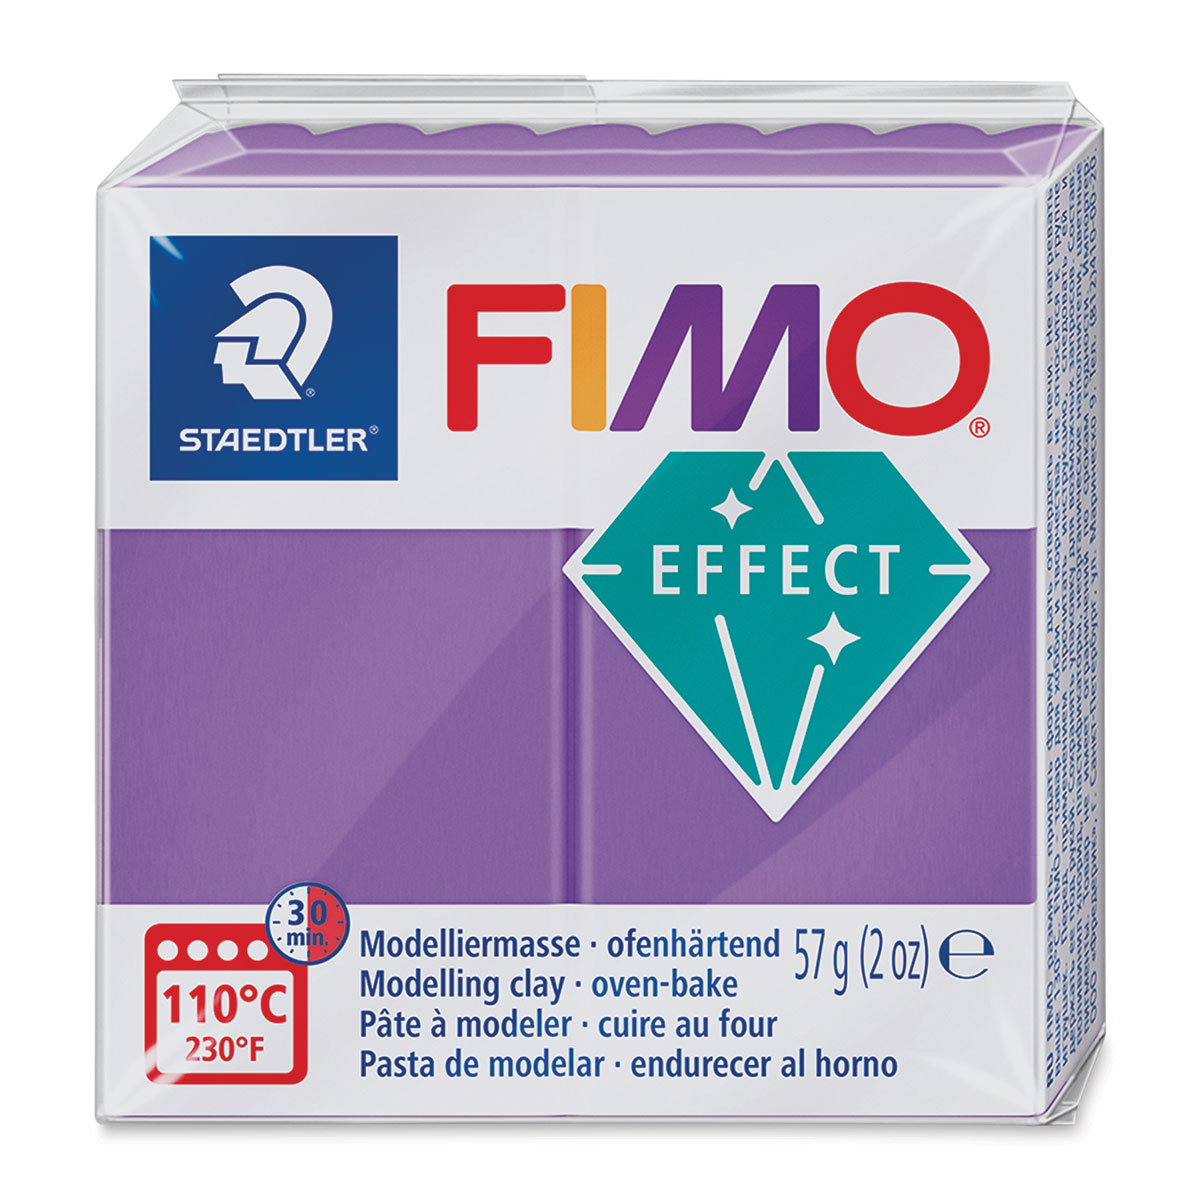 STAEDTLER FIMO Effect Transparent Red FIMO Effect Polymer Modelling Moulding Clay Block Oven Bake Colour 56g 204 Pack Of 5 